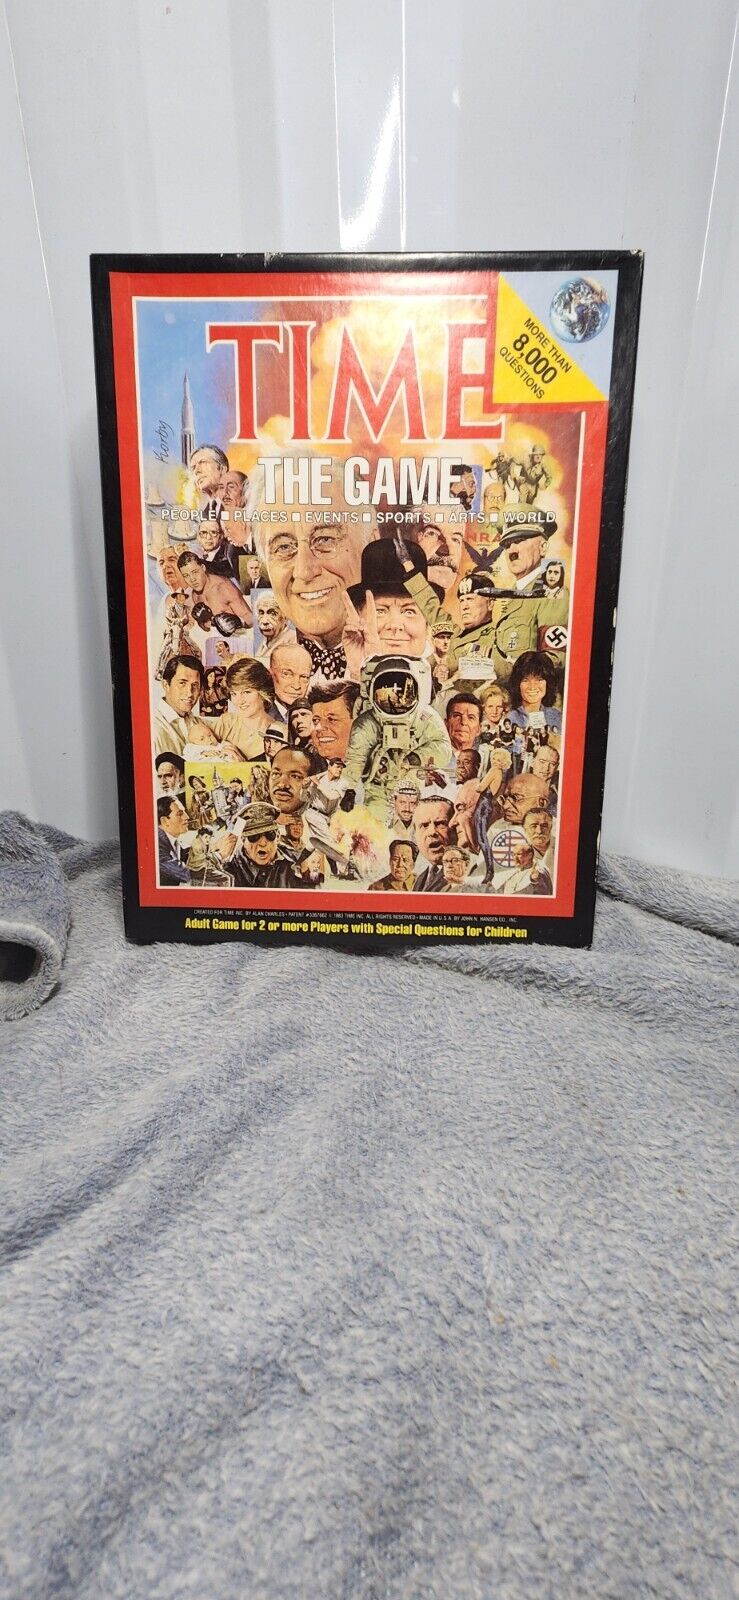 TIME Life The Game 100% complete VTG 1983 Time Inc Open Vut Never Played